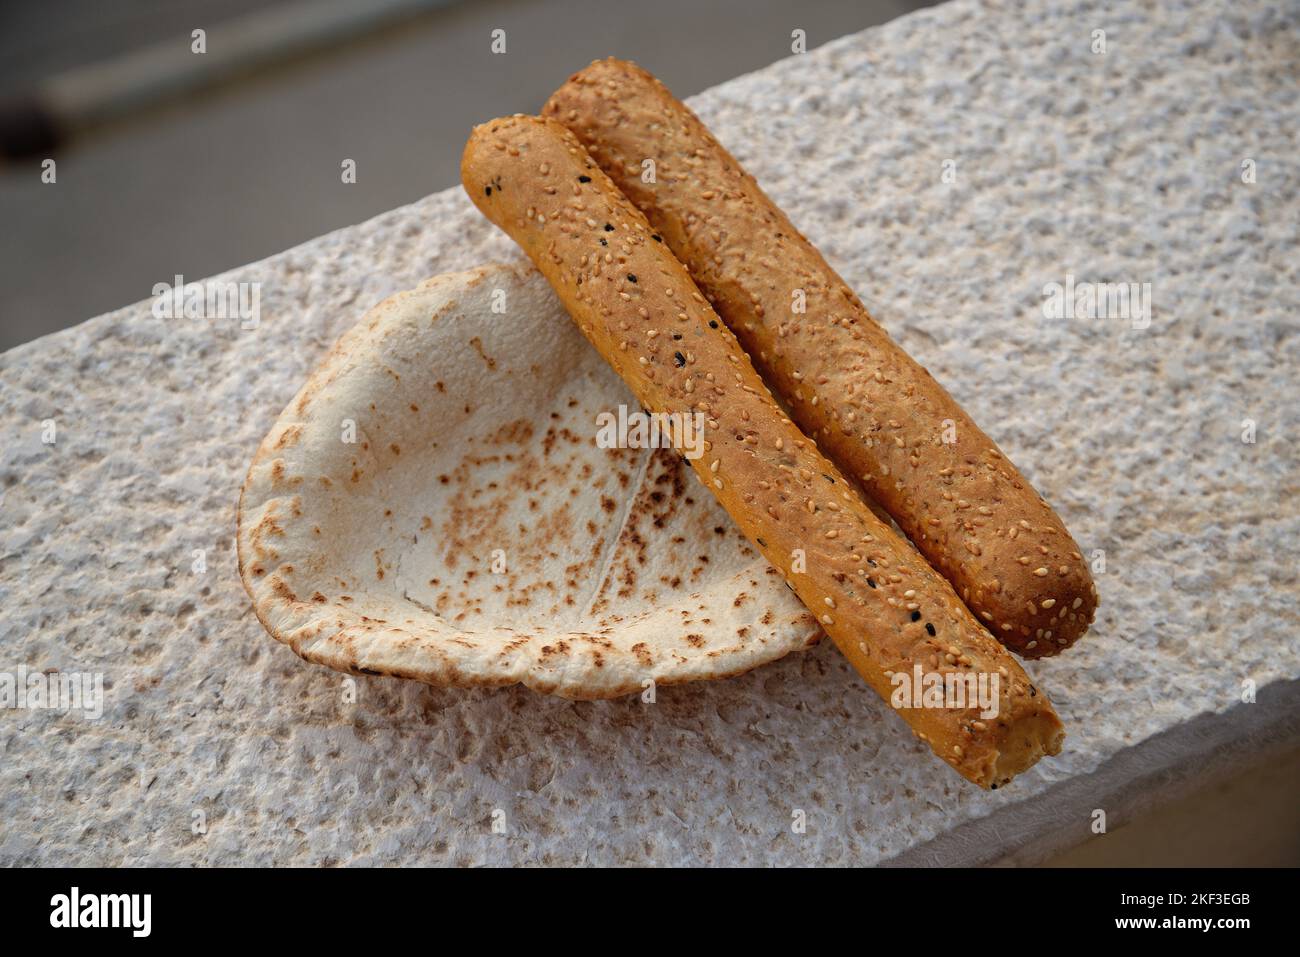 Jordanian flat bread and seeded bread sticks. Middle Eastern staple diet of wheat based food. Stock Photo